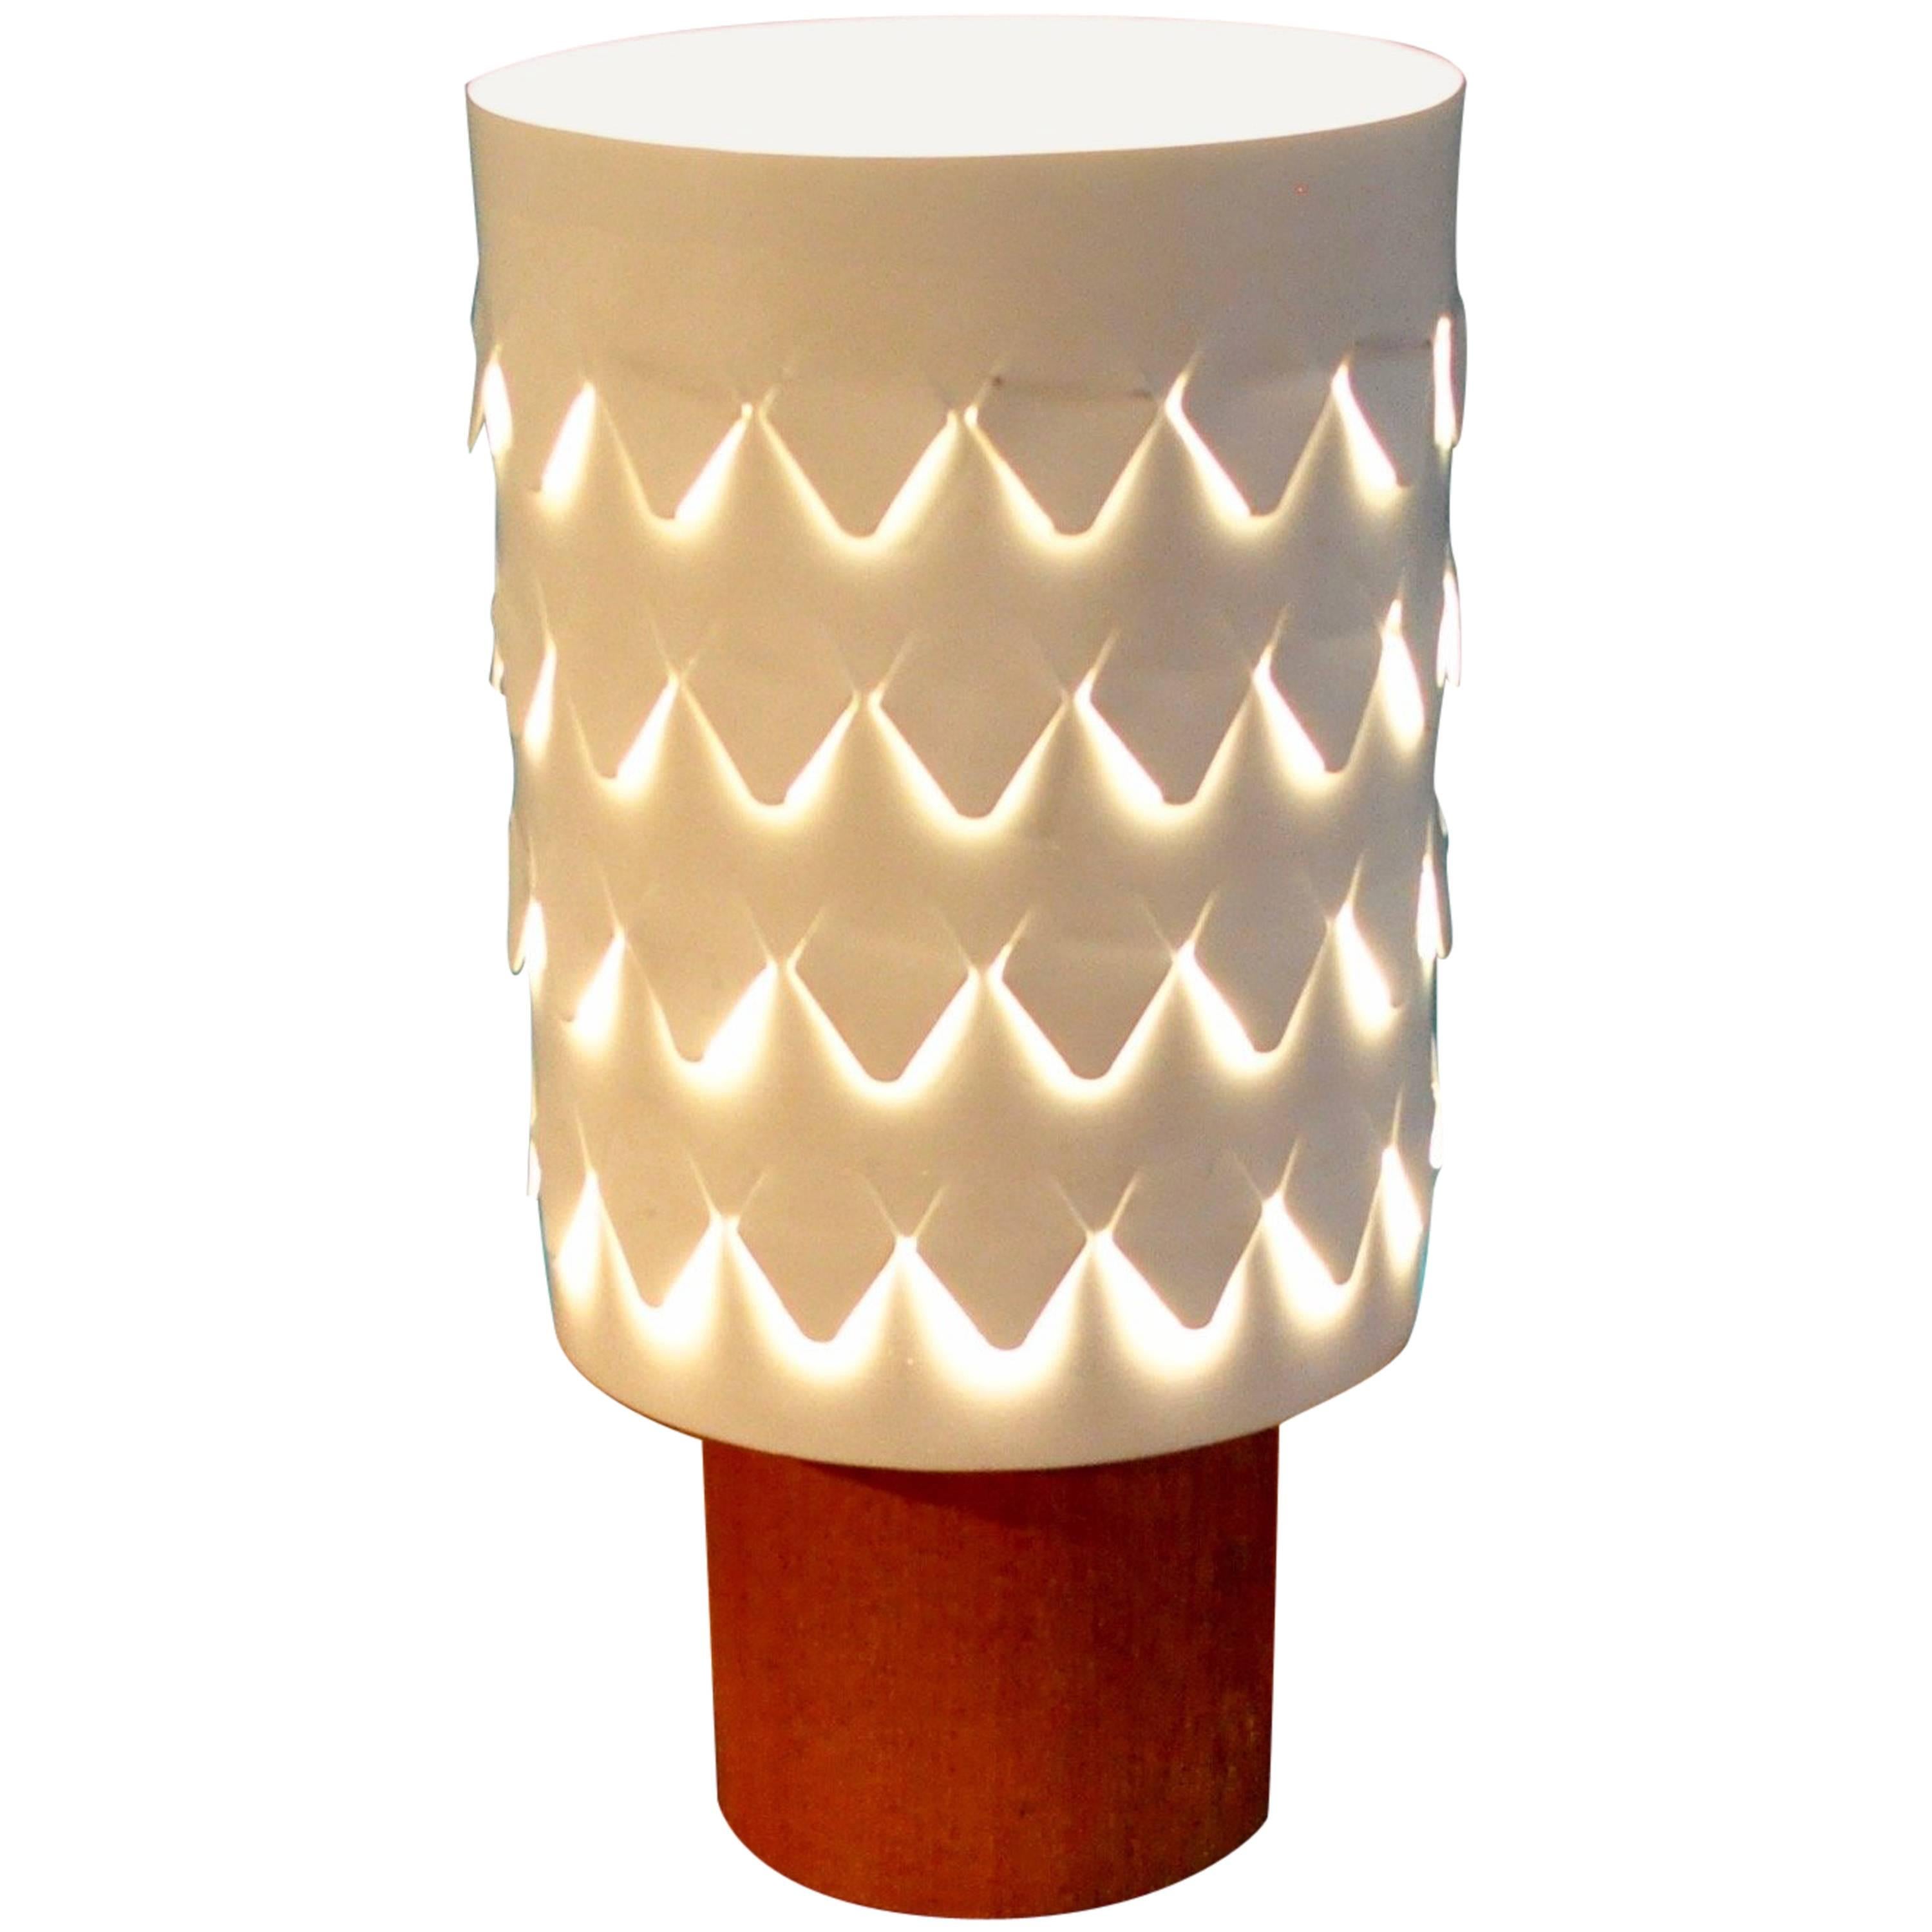 Early Table White Lamp in Teak and Perforaed Metal by Hans Agne Jakobsson